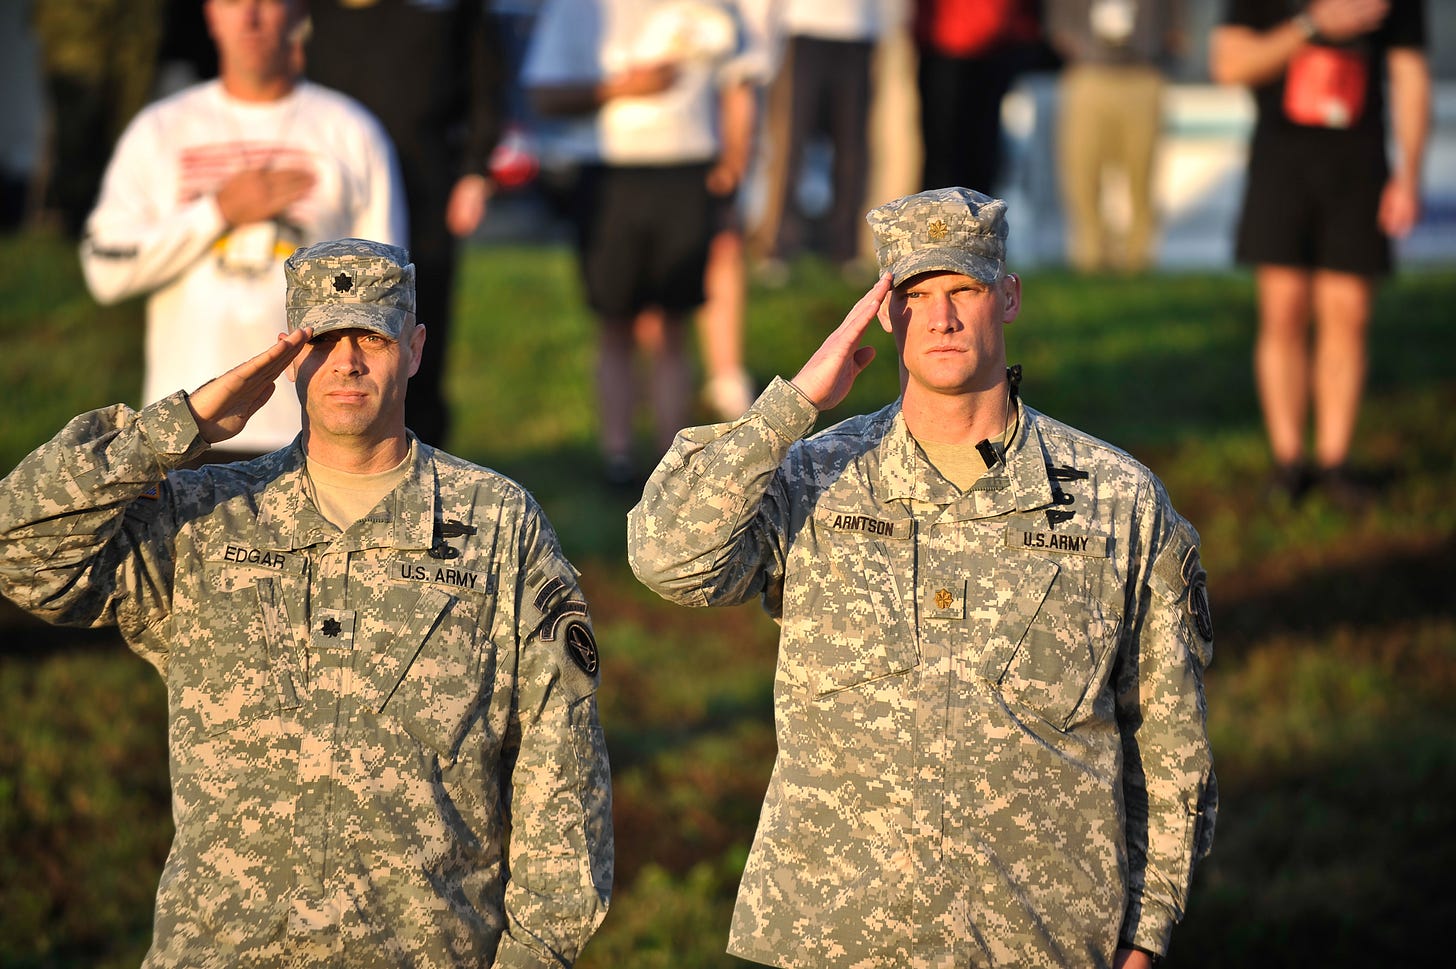 File:Flickr - The U.S. Army - Army Ten-Miler Salute.jpg - Wikimedia Commons